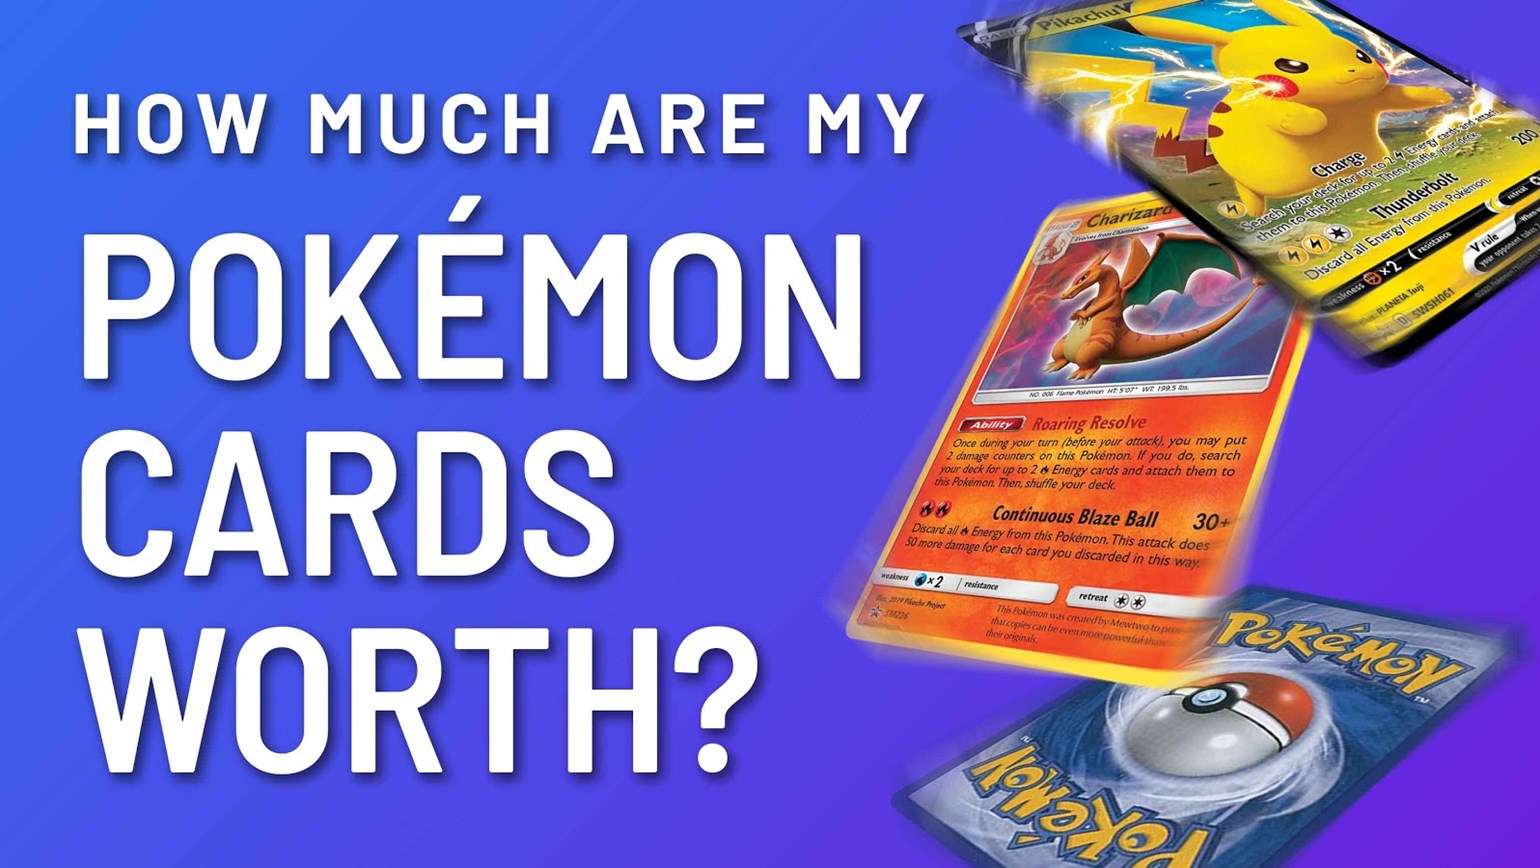 How Much Are My Pokémon Cards Worth?